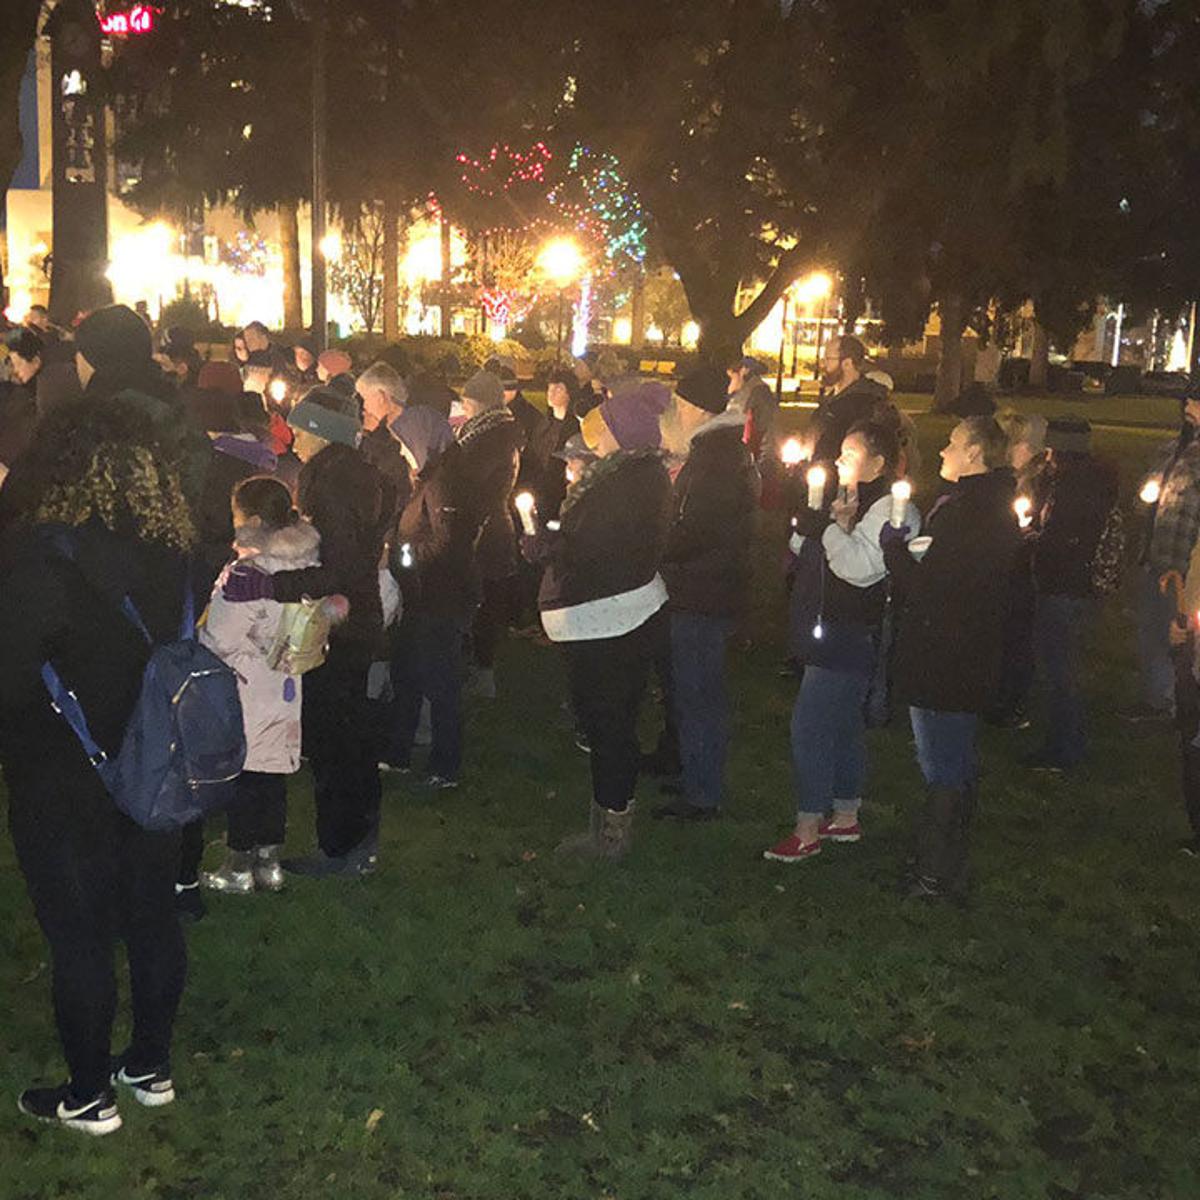 Dozens gathered at Esther Short Park in Vancouver last weekend to remember Tiffany Hill, who was killed by her estranged husband on Nov. 26. Photo courtesy KPTV FOX 12